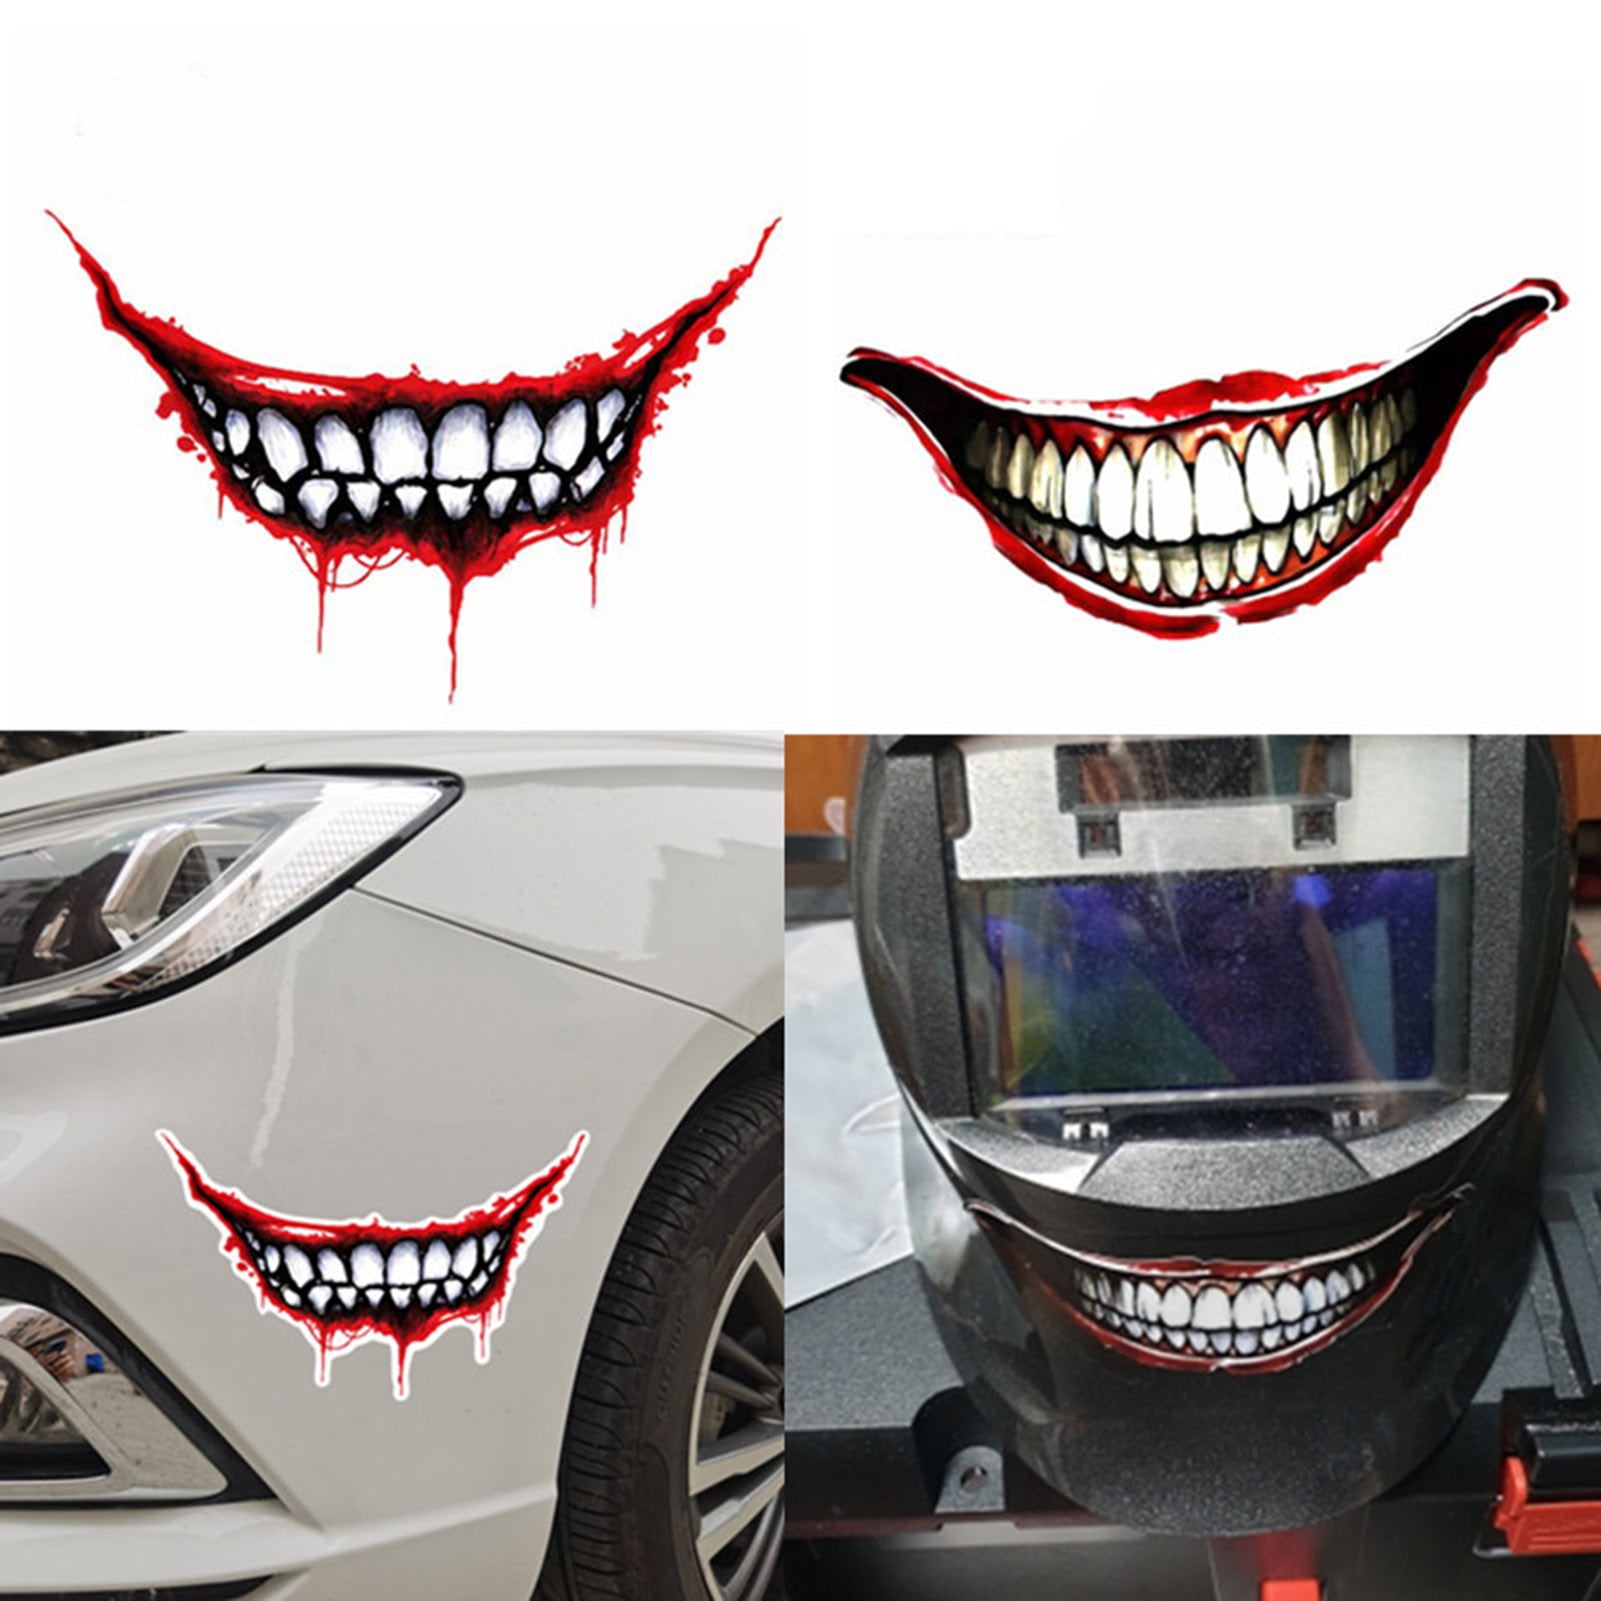 Yirtree Car Sticker Waterproof Lips Shape Fadeless Eye-catching Big Mouth  Pattern Easy to Apply Eco-friendly Motorcycle Helmet Halloween Stickers for  Car 